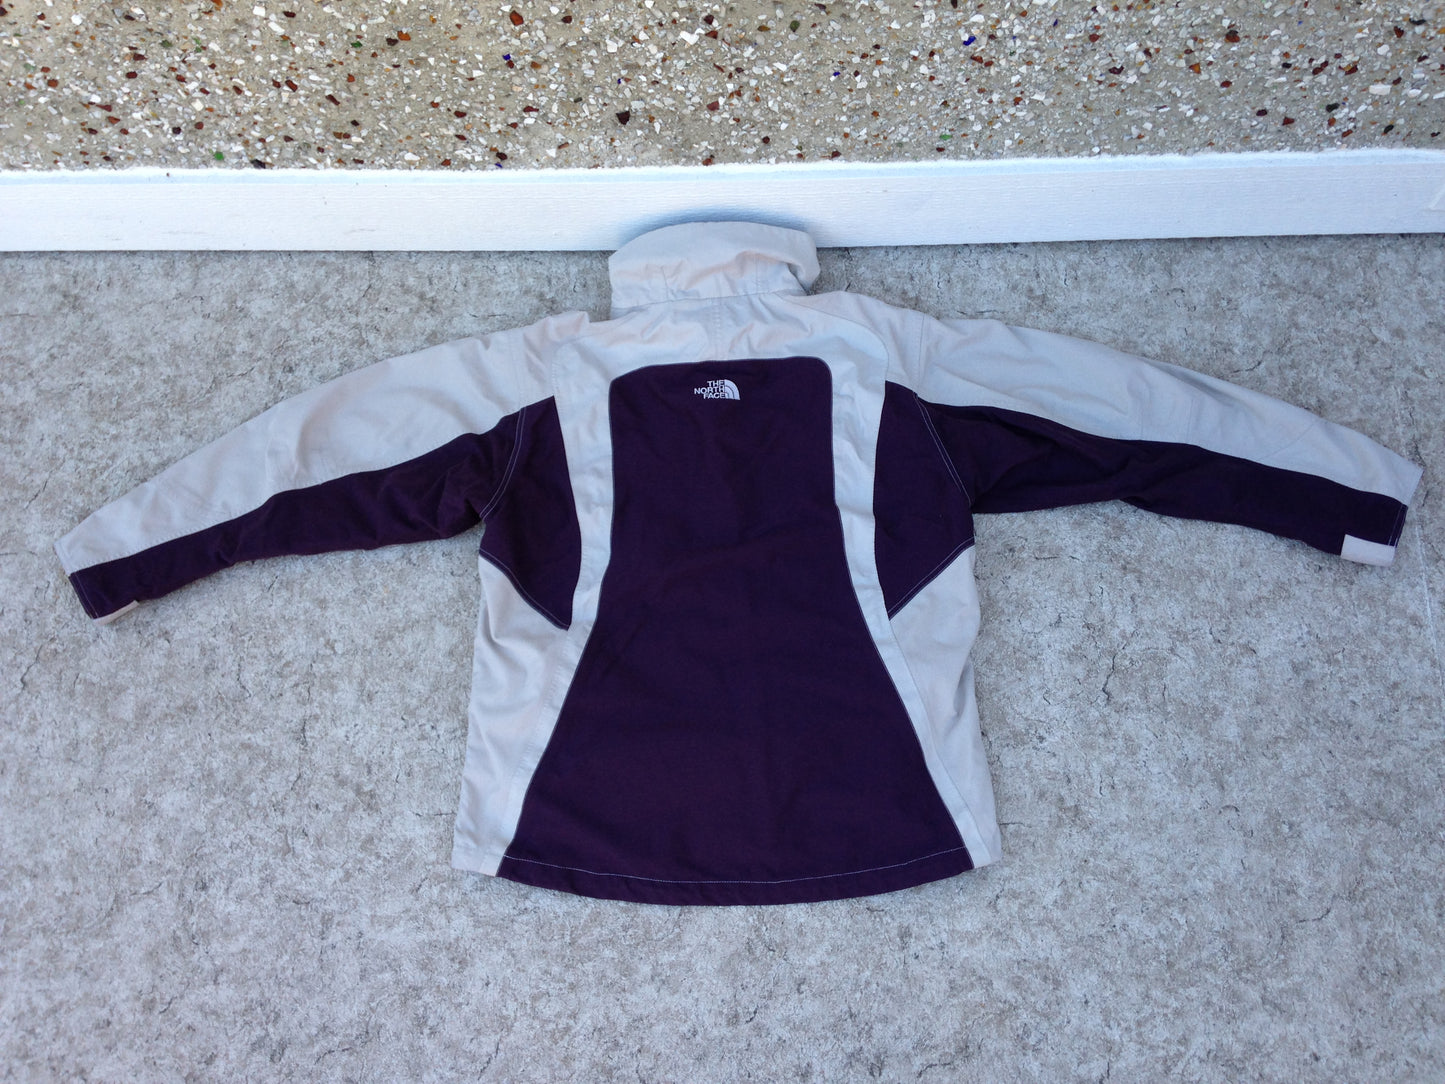 Winter Coat Ladies Size Large The North Face Grey Purple With Snow Belt Excellent